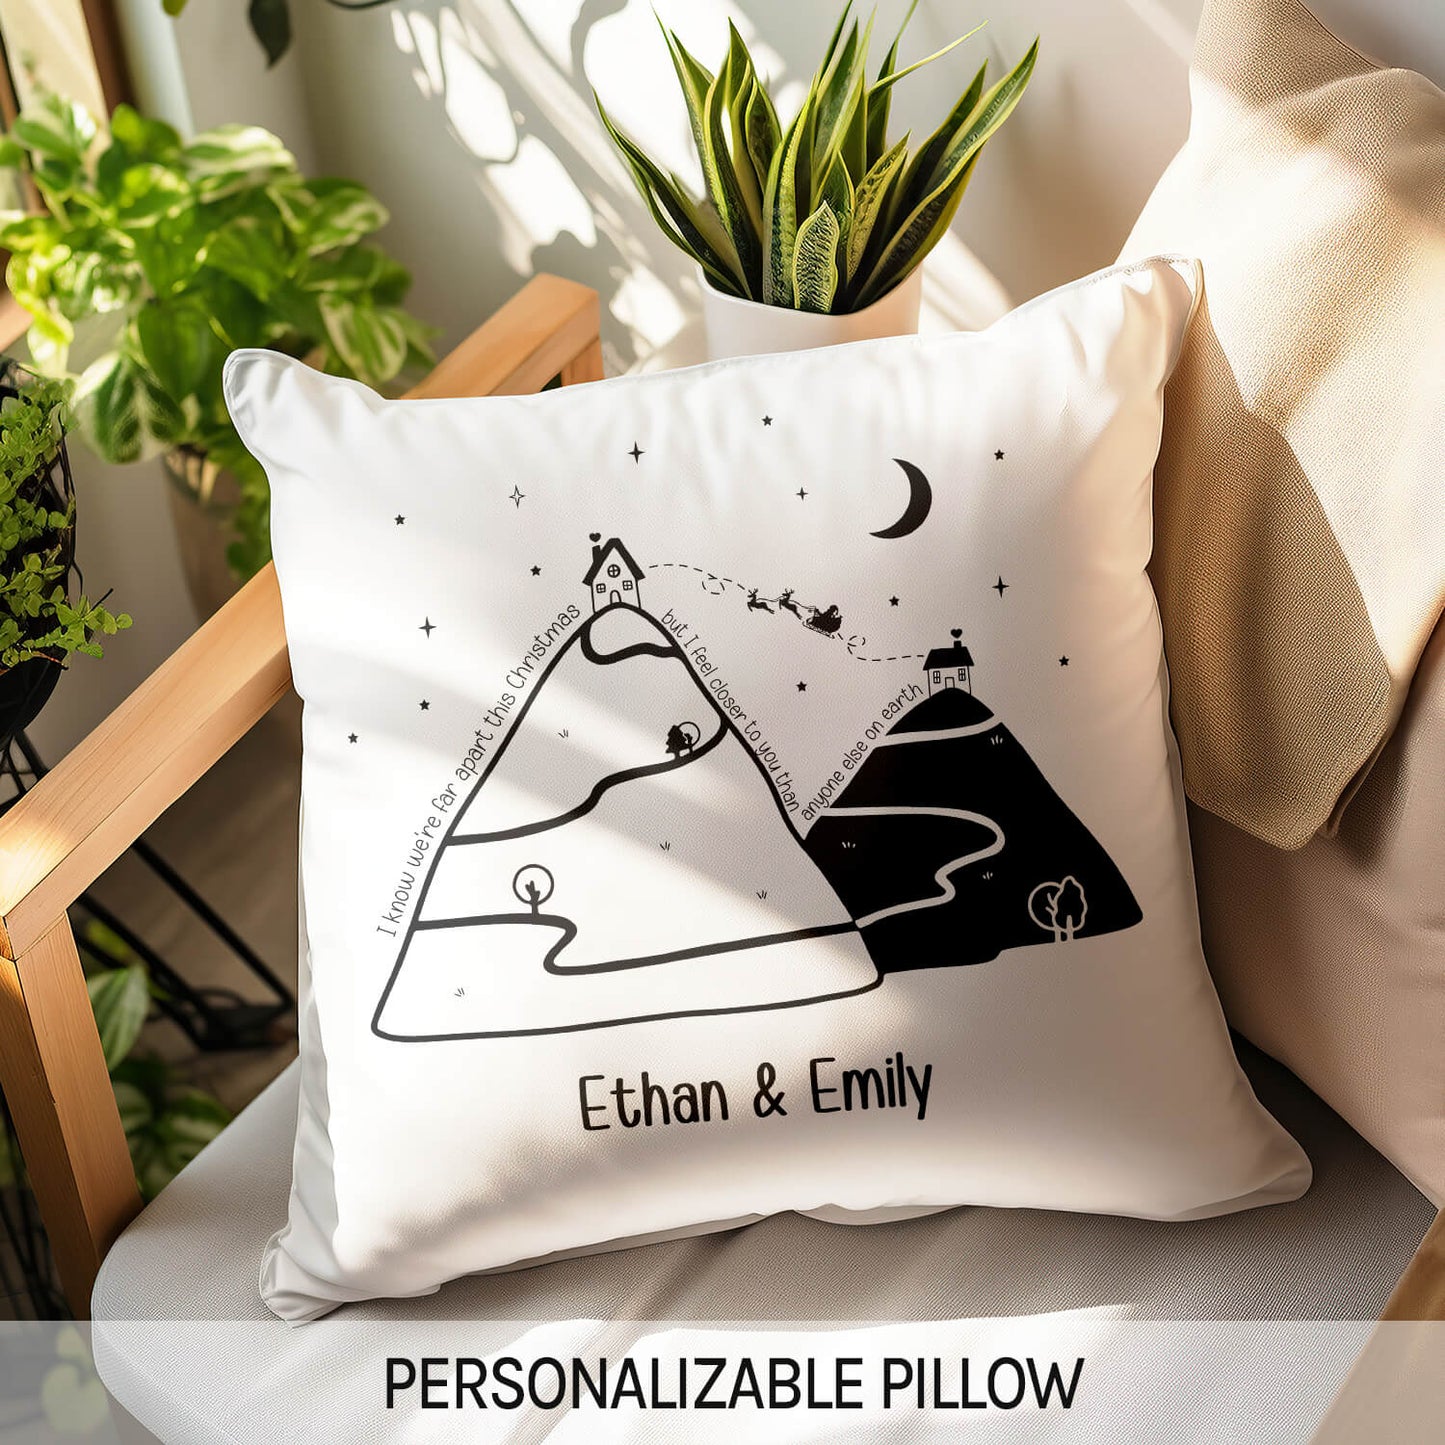 We're Far Apart This Christmas - Personalized Christmas gift For Long Distance Boyfriend or Girlfriend - Custom Pillow - MyMindfulGifts